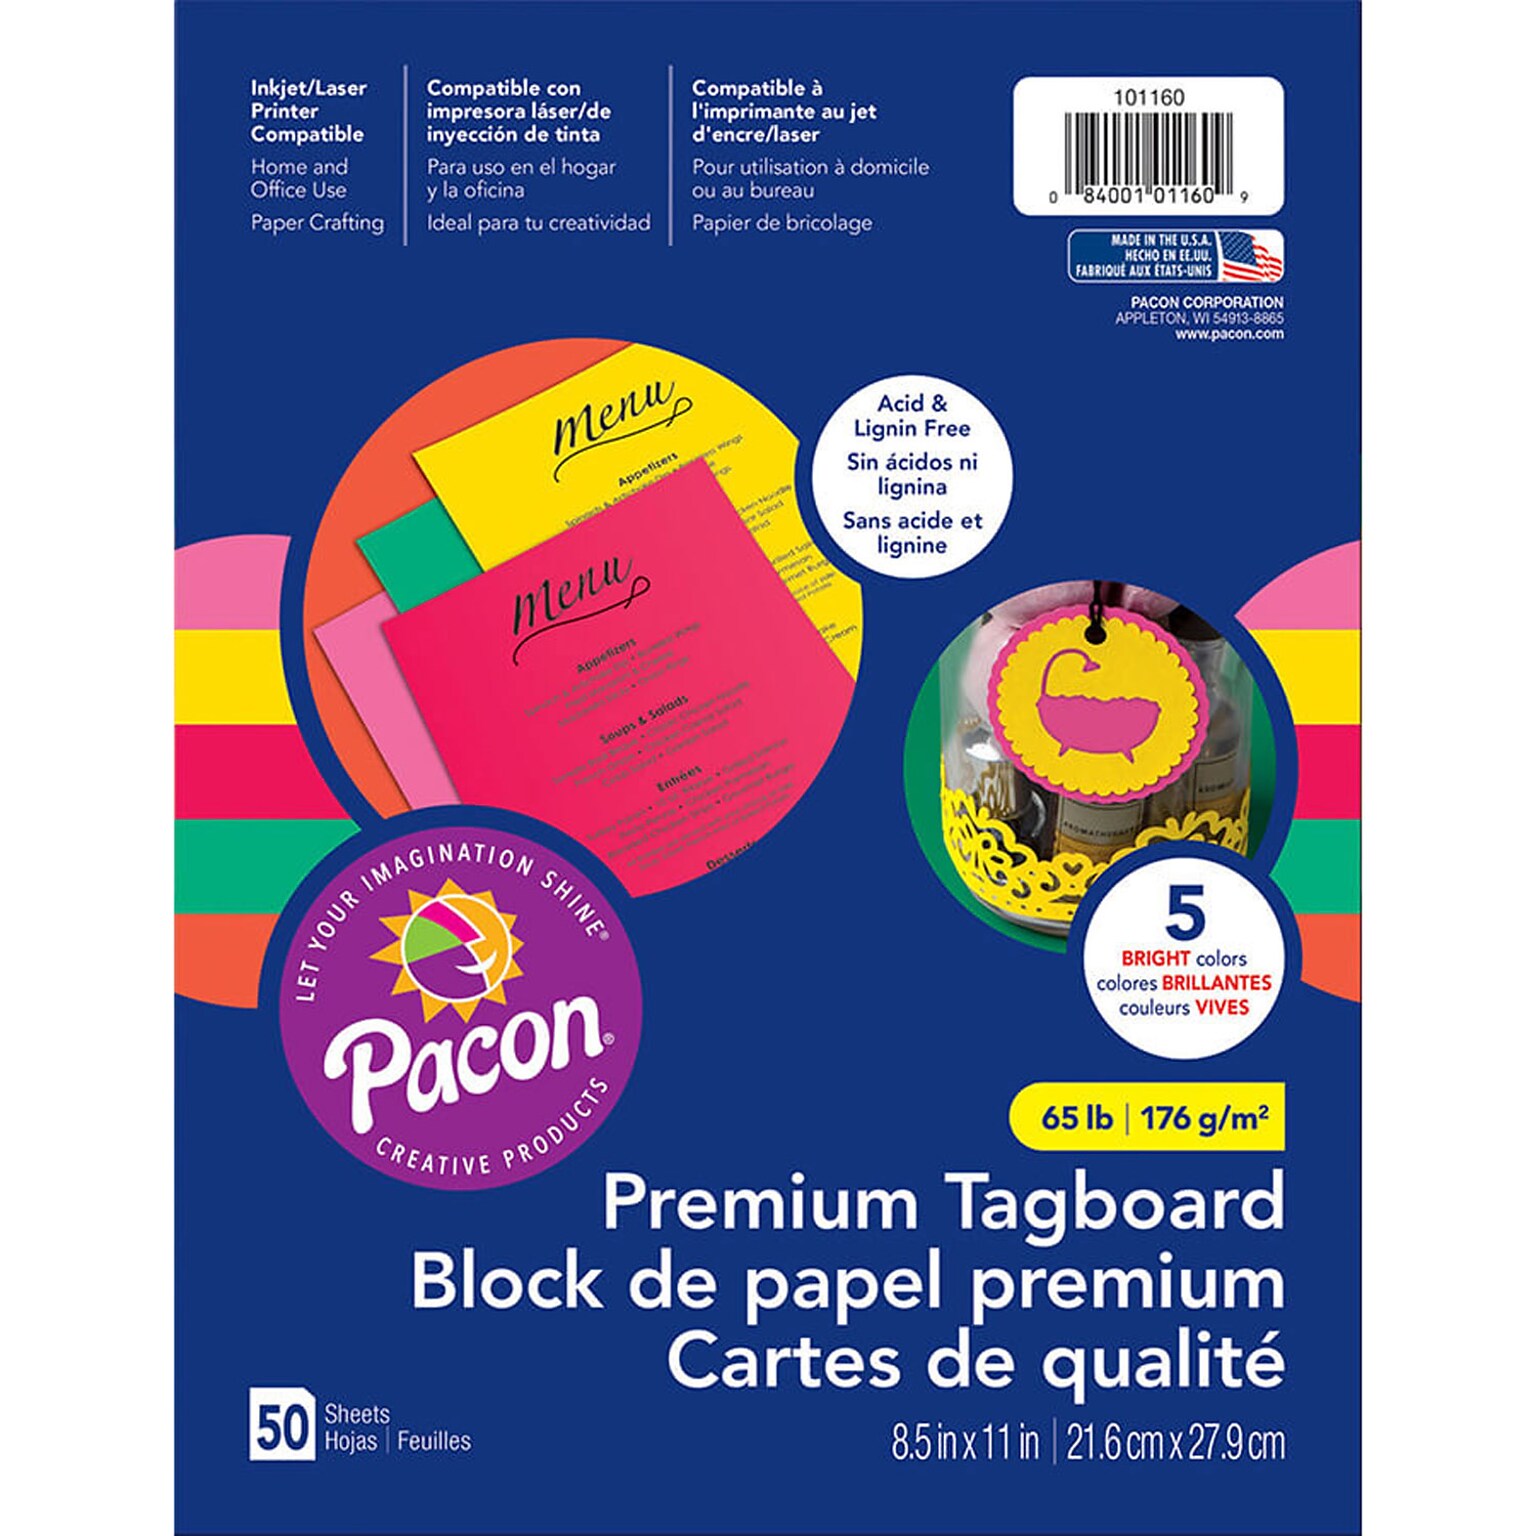 Pacon Hyper Premium Tagboard Assortment, 8.5 x 11, Bundle of 3 Packs, 50 Sheets Per Pack (PAC101160)